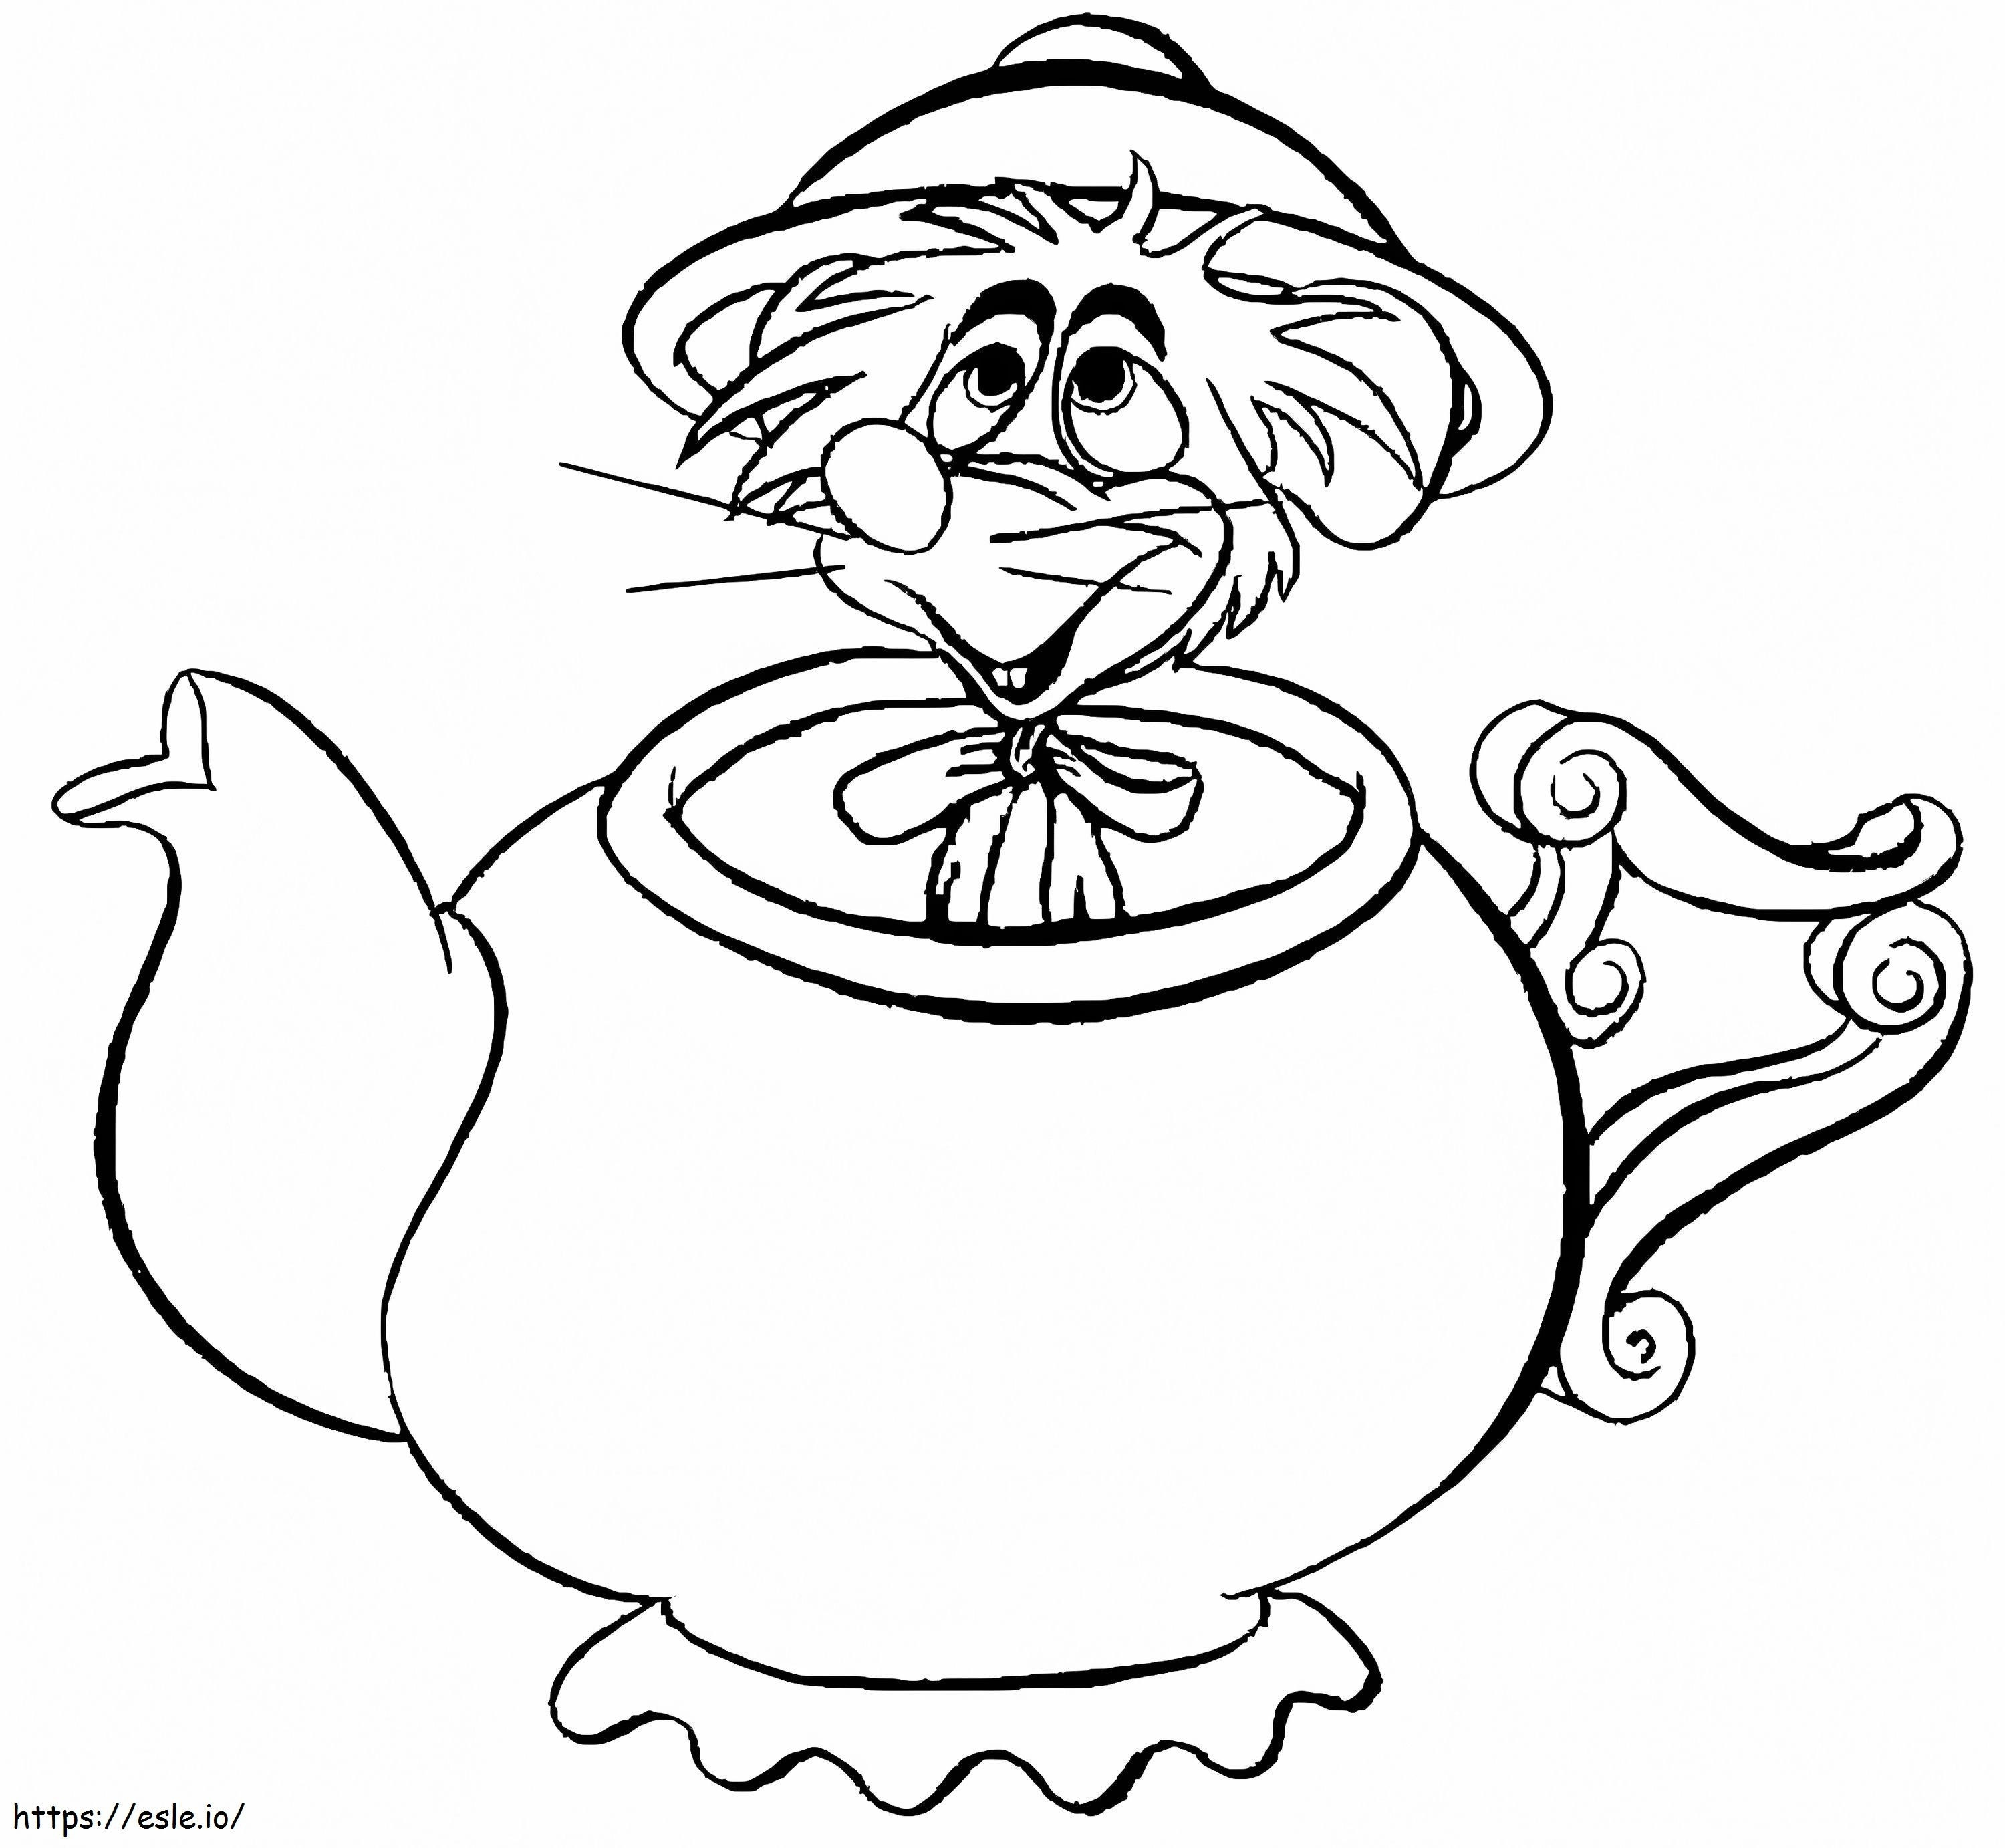 The Dormouse From Alice In Wonderland coloring page